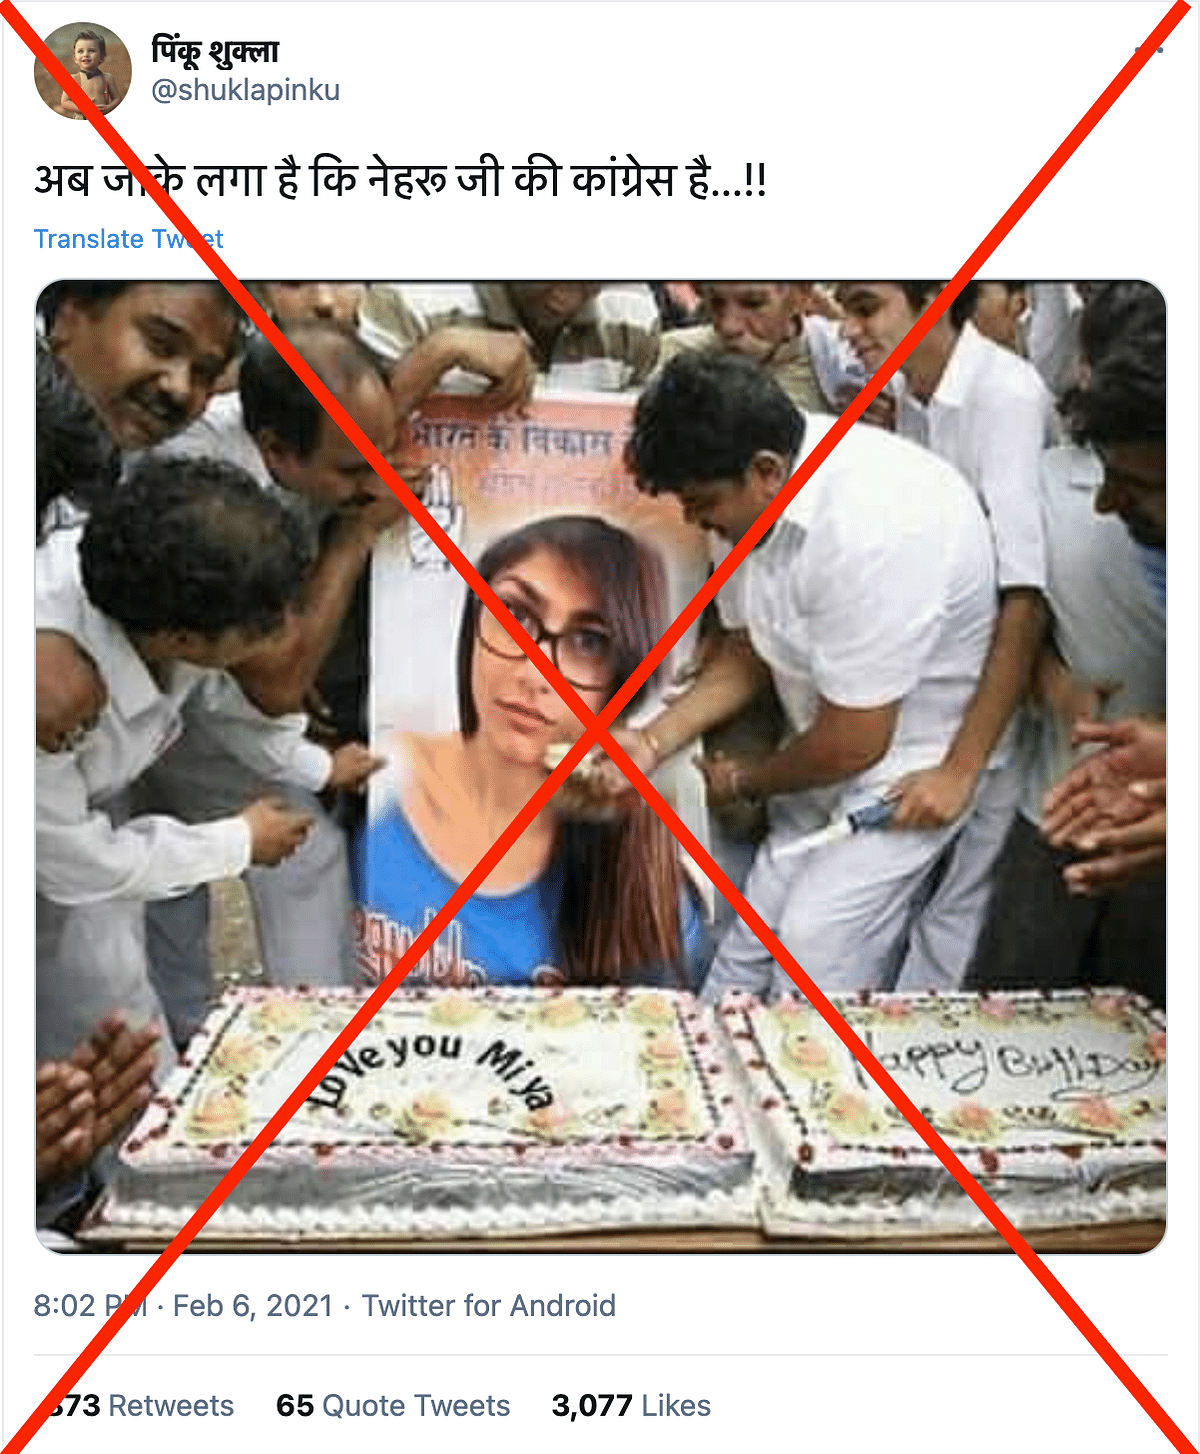 The original image is more than a decade old and shows Congress workers celebrating Rahul Gandhi’s birthday.